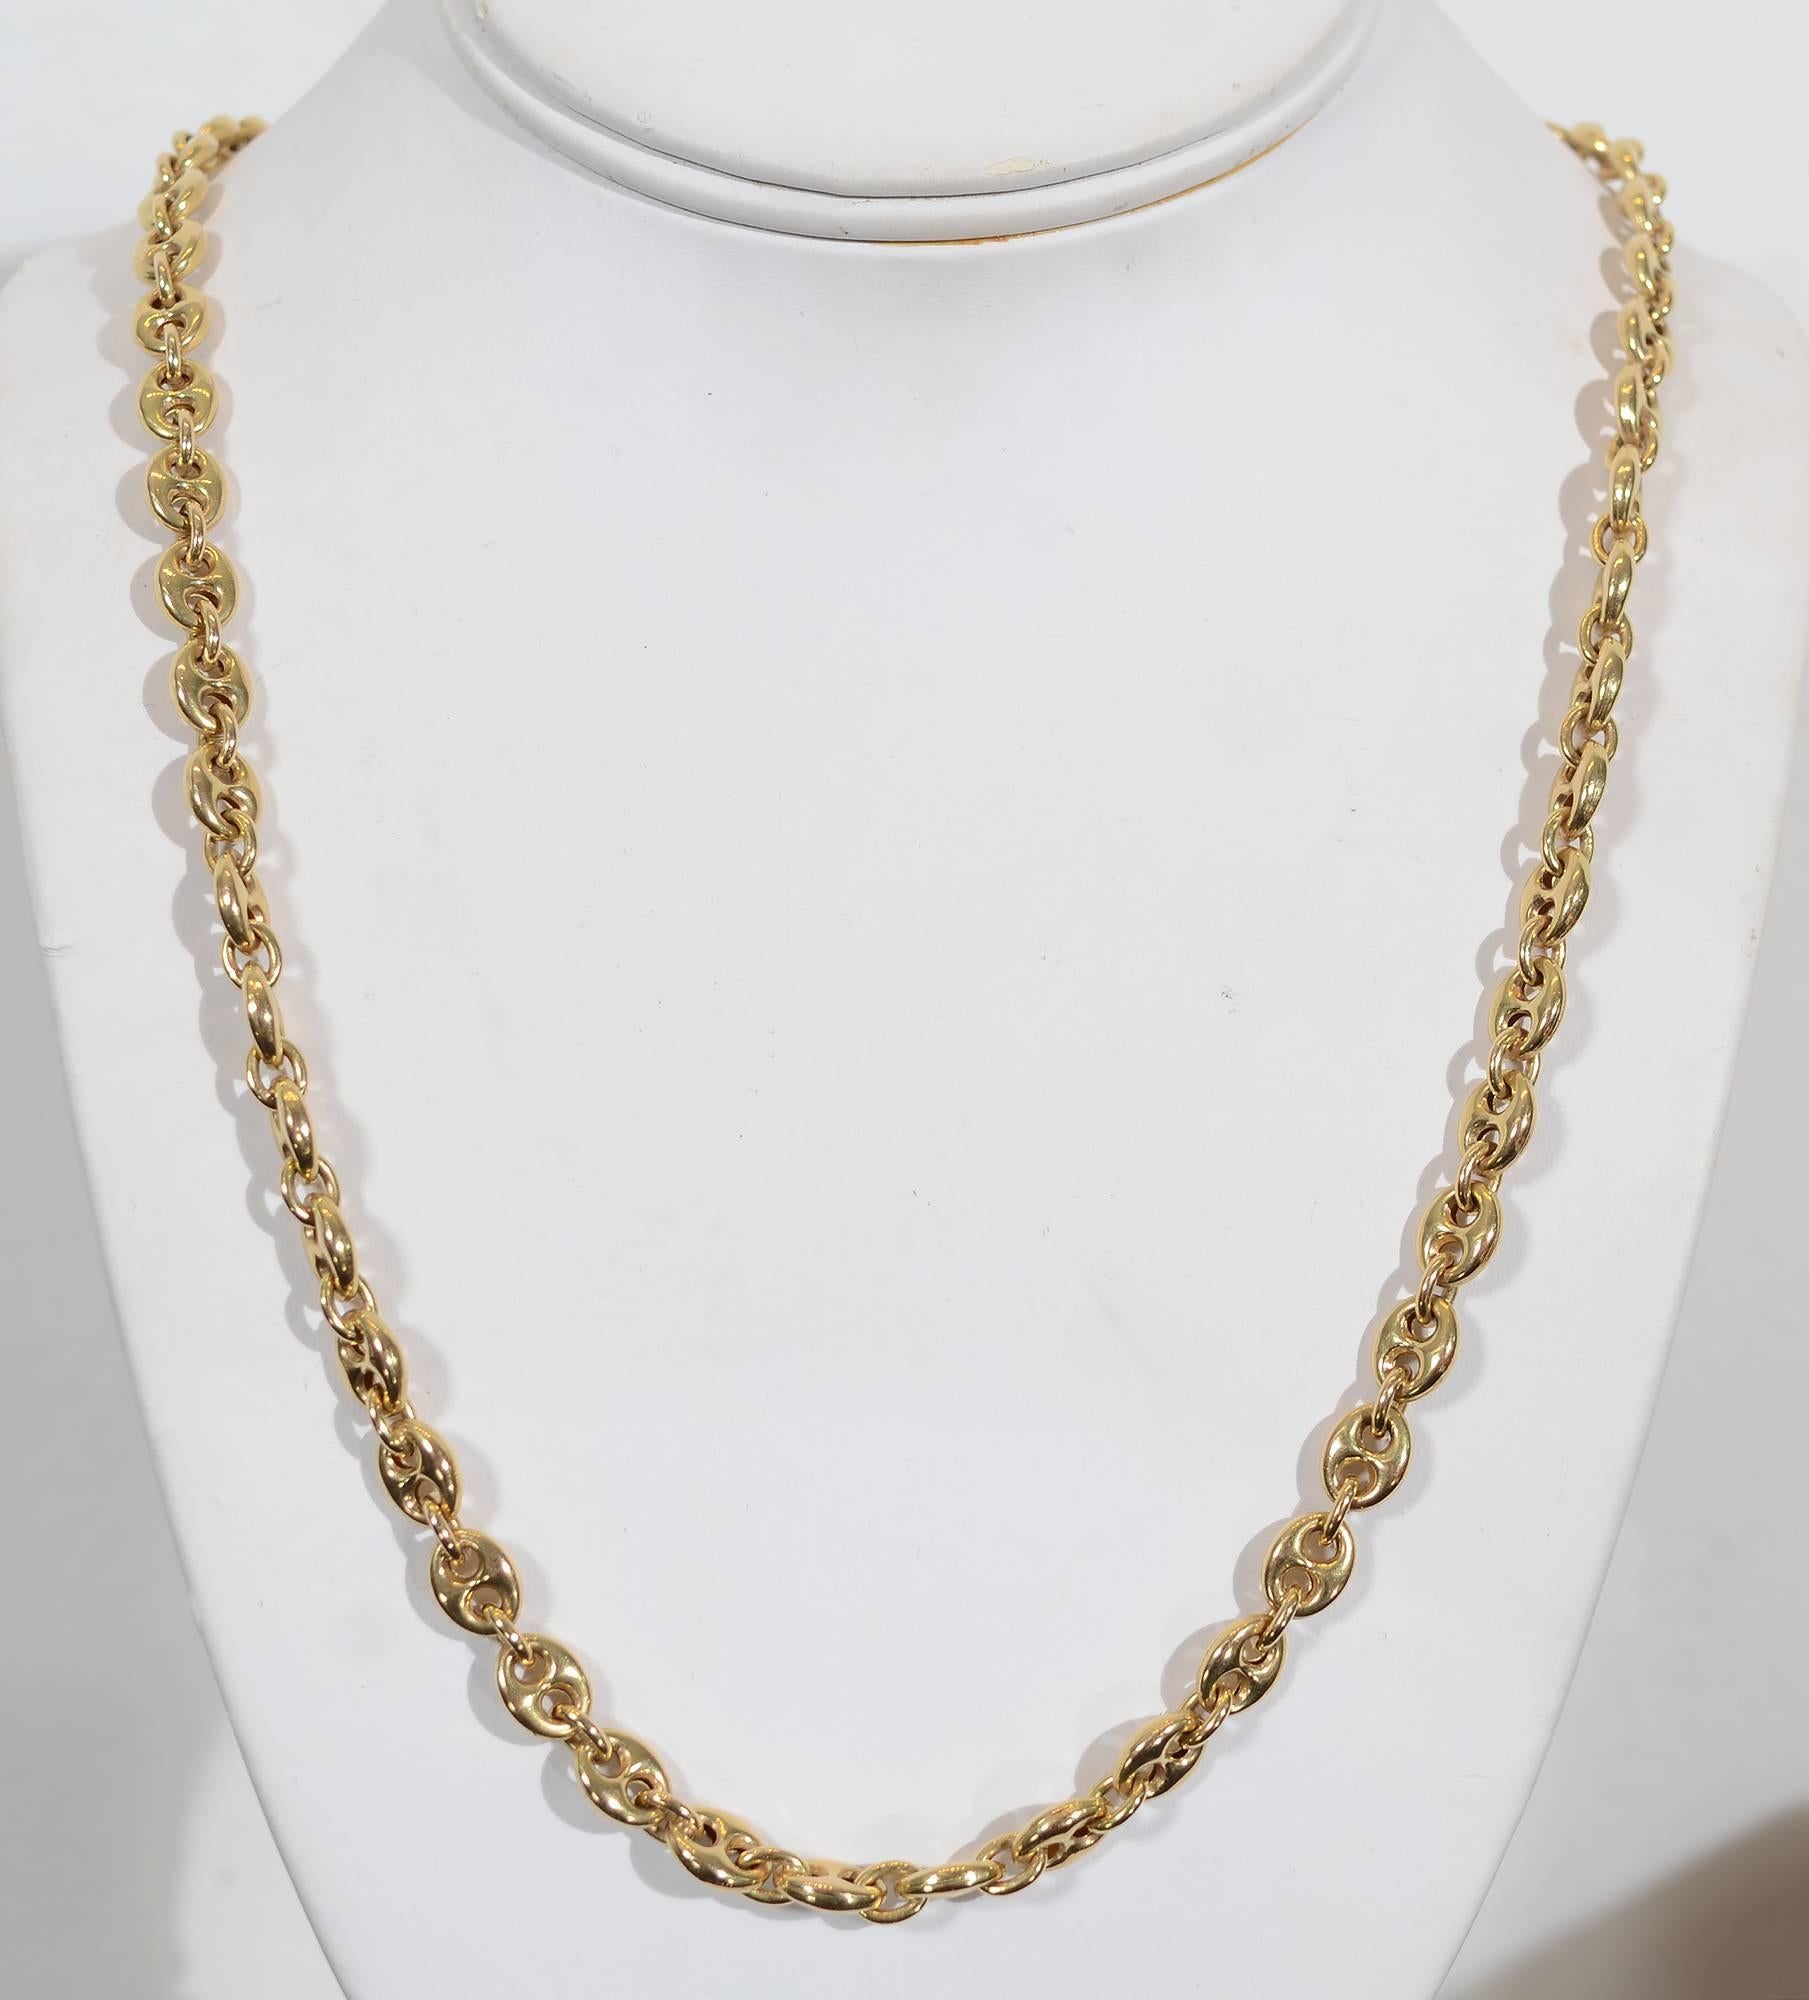 Classic gold chain necklace done with what is referred to as the Gucci link. It measures 42 inches long so it can be worn as either a single length or doubled. One can also hang a pendant from it.